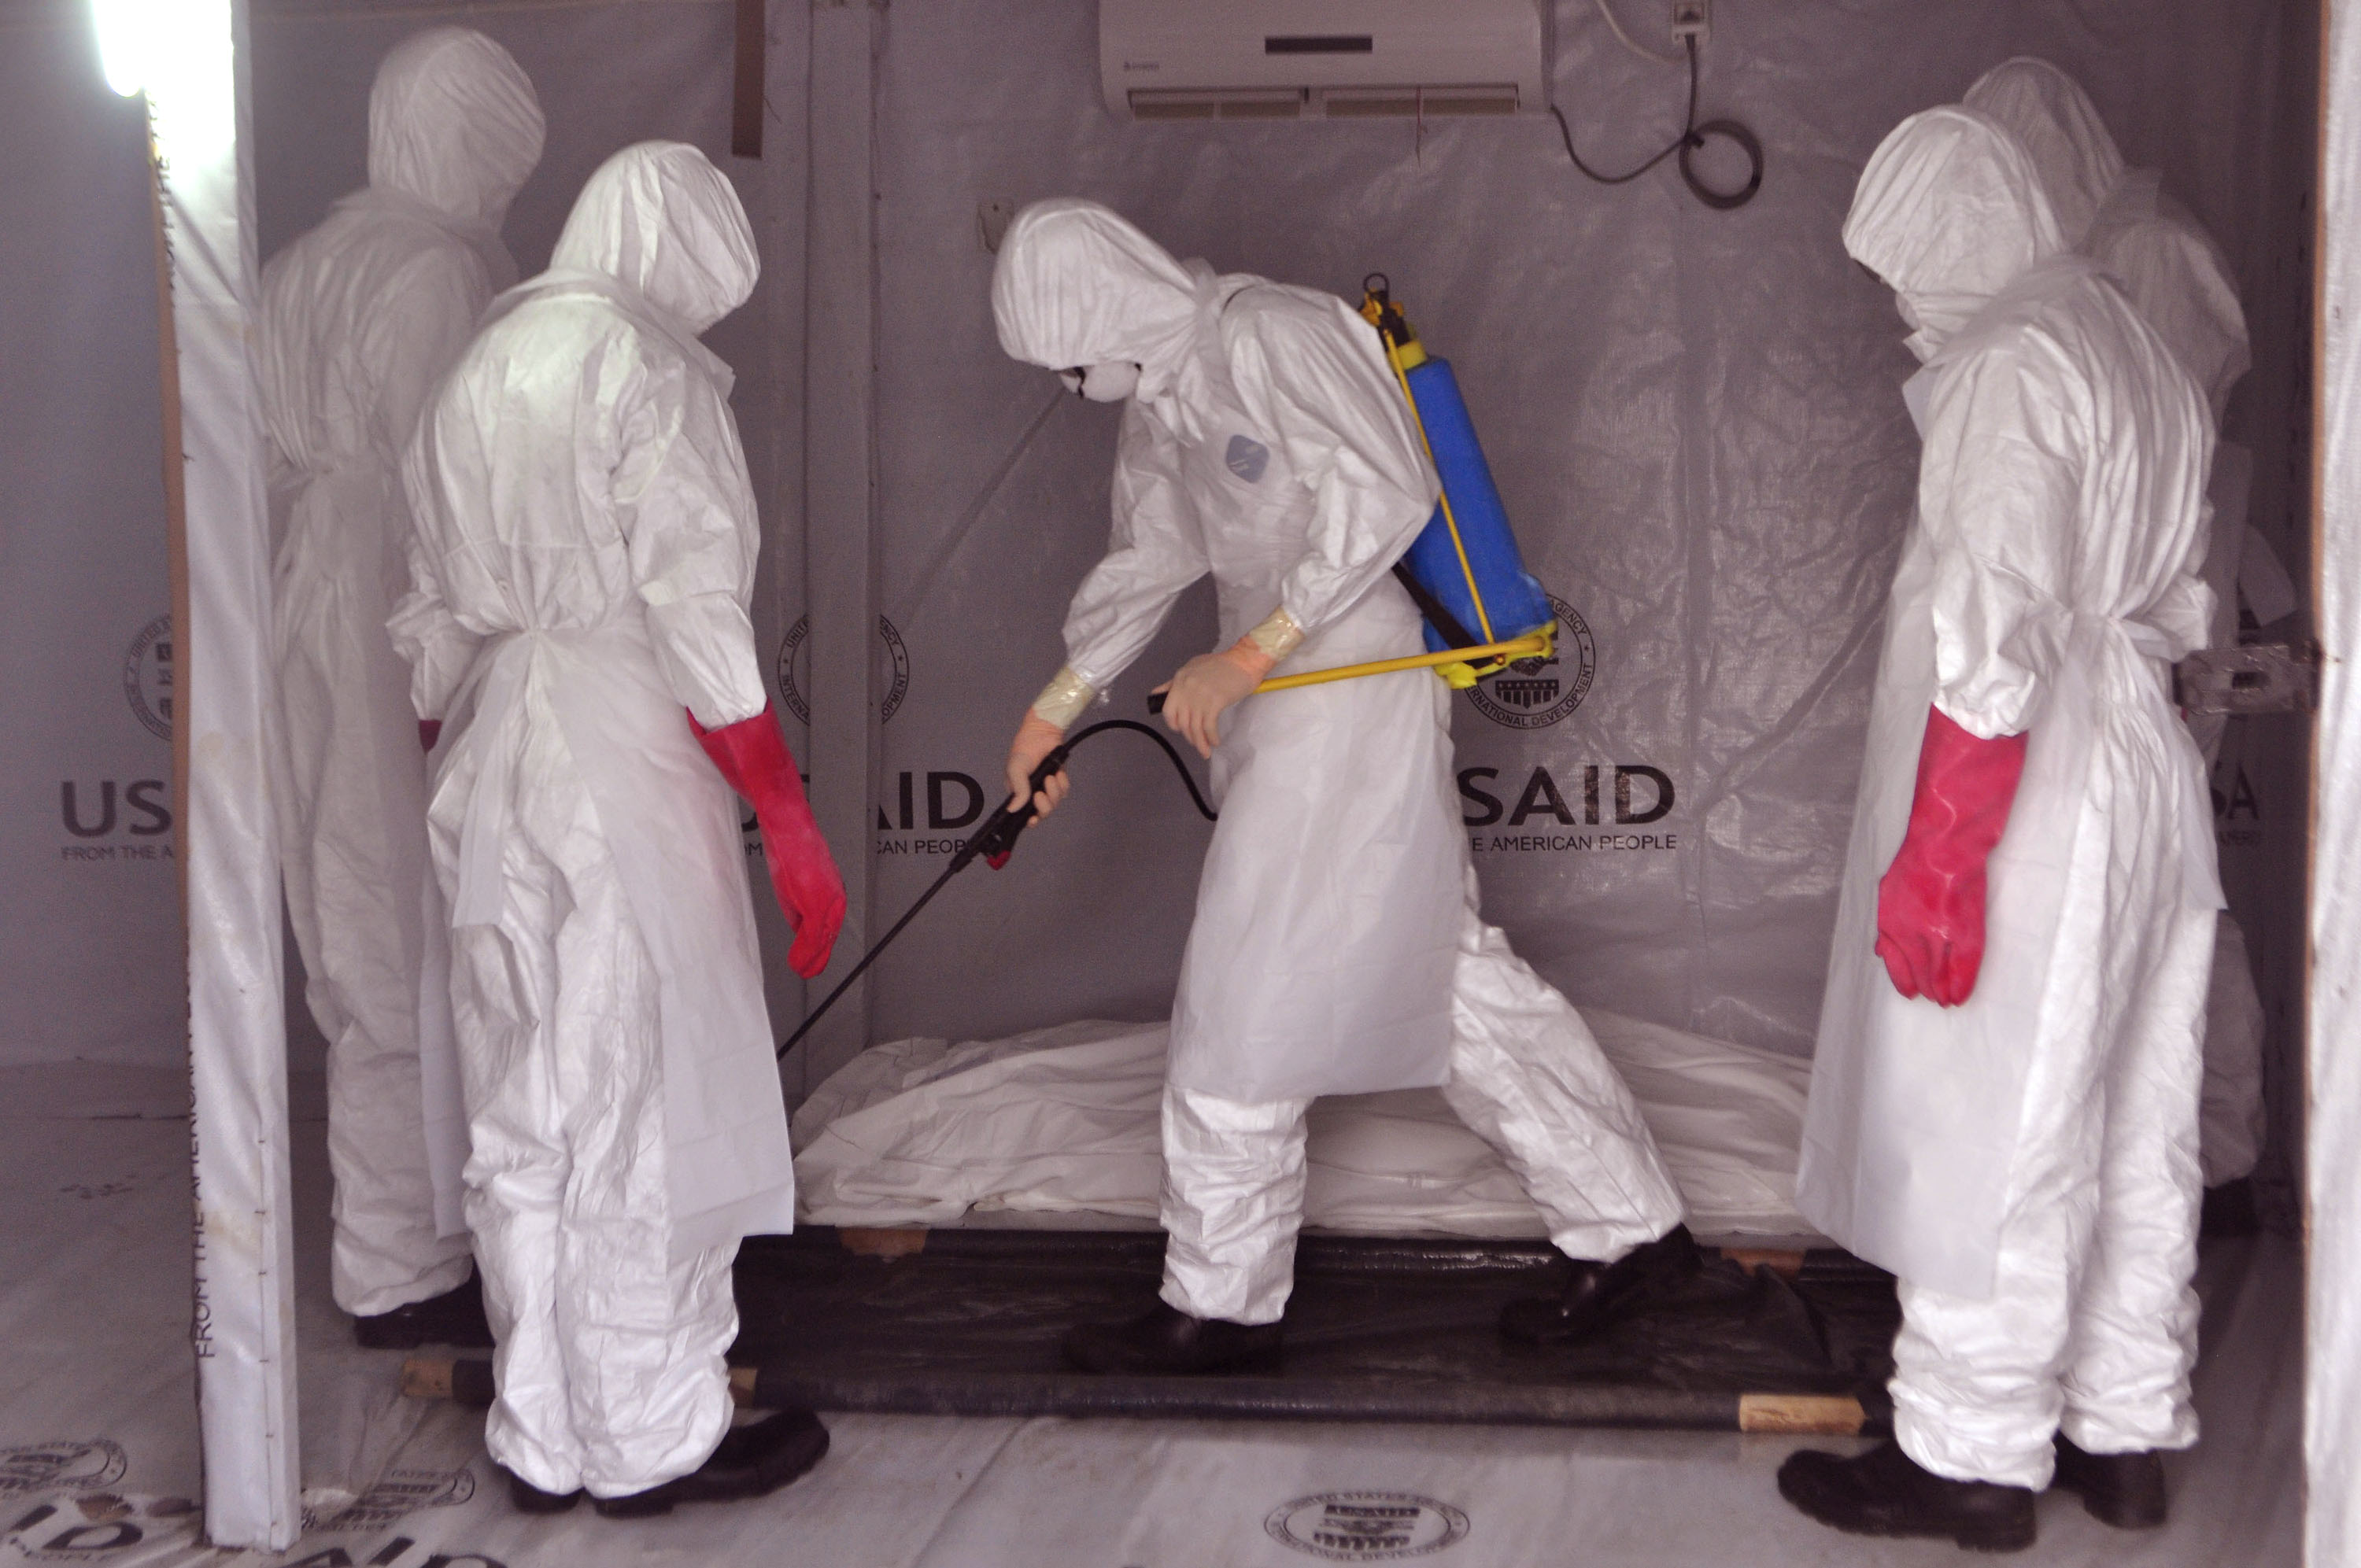 Health workers wearing Ebola protective gear spray the shrouded body of a suspected Ebola victim with disinfectant at an Ebola treatment center at Tubmanburg, on the outskirts of  Monrovia, Liberia, on Nov. 28, 2014 (Abbas Dulleh—AP)